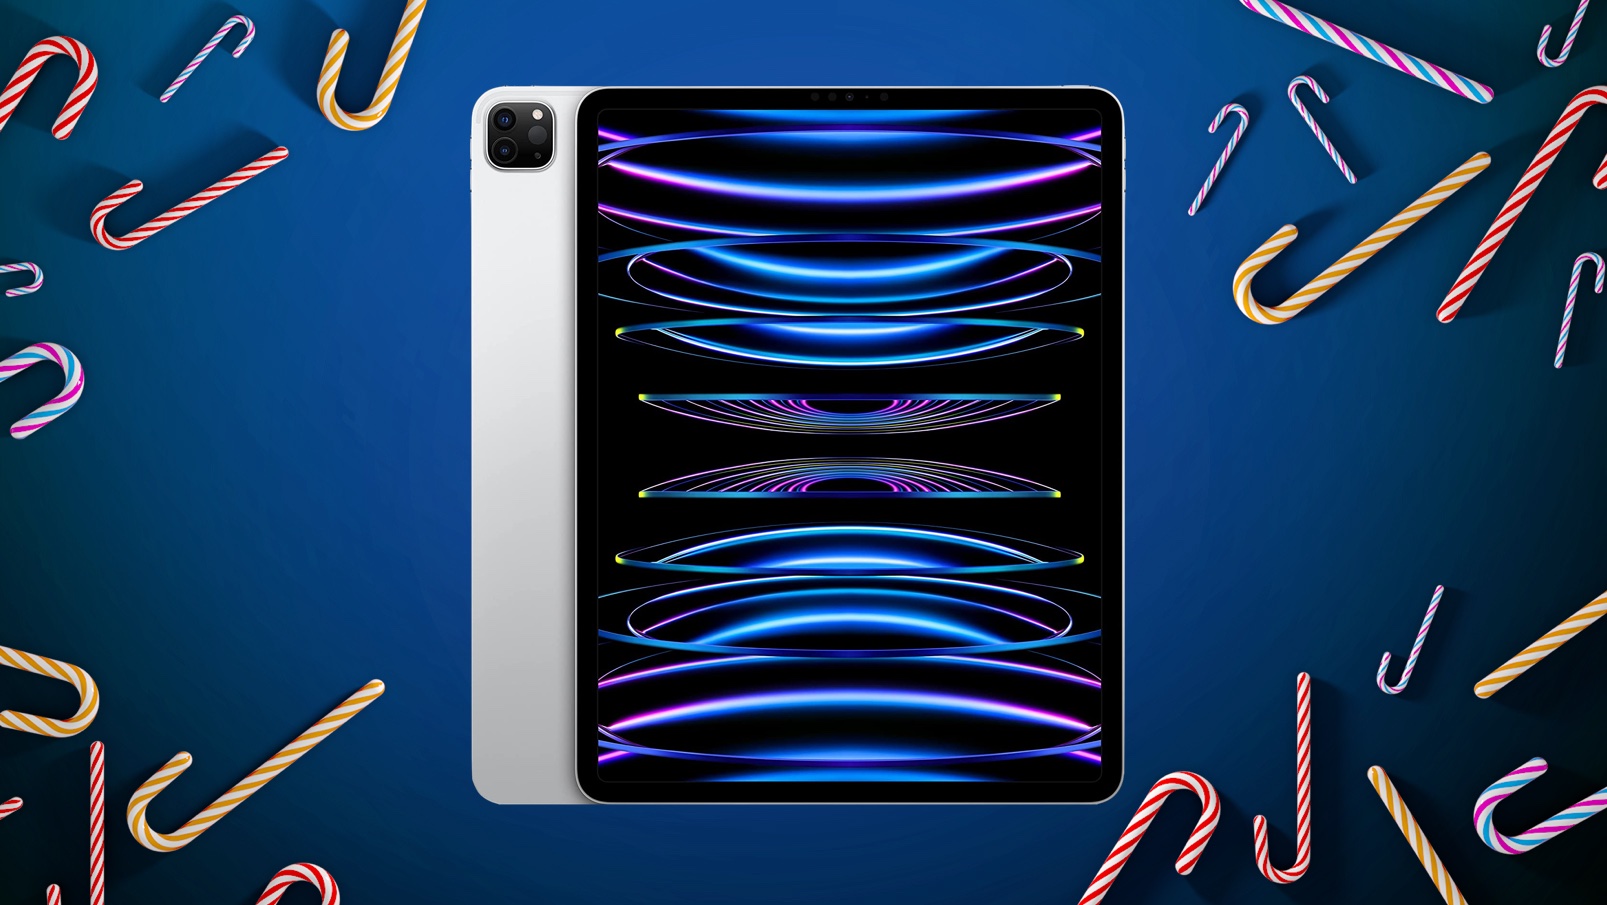 Cyber Week Apple Deals Continue With All-Time Low Prices on M2 iPad Pro (Up to $100 Off)